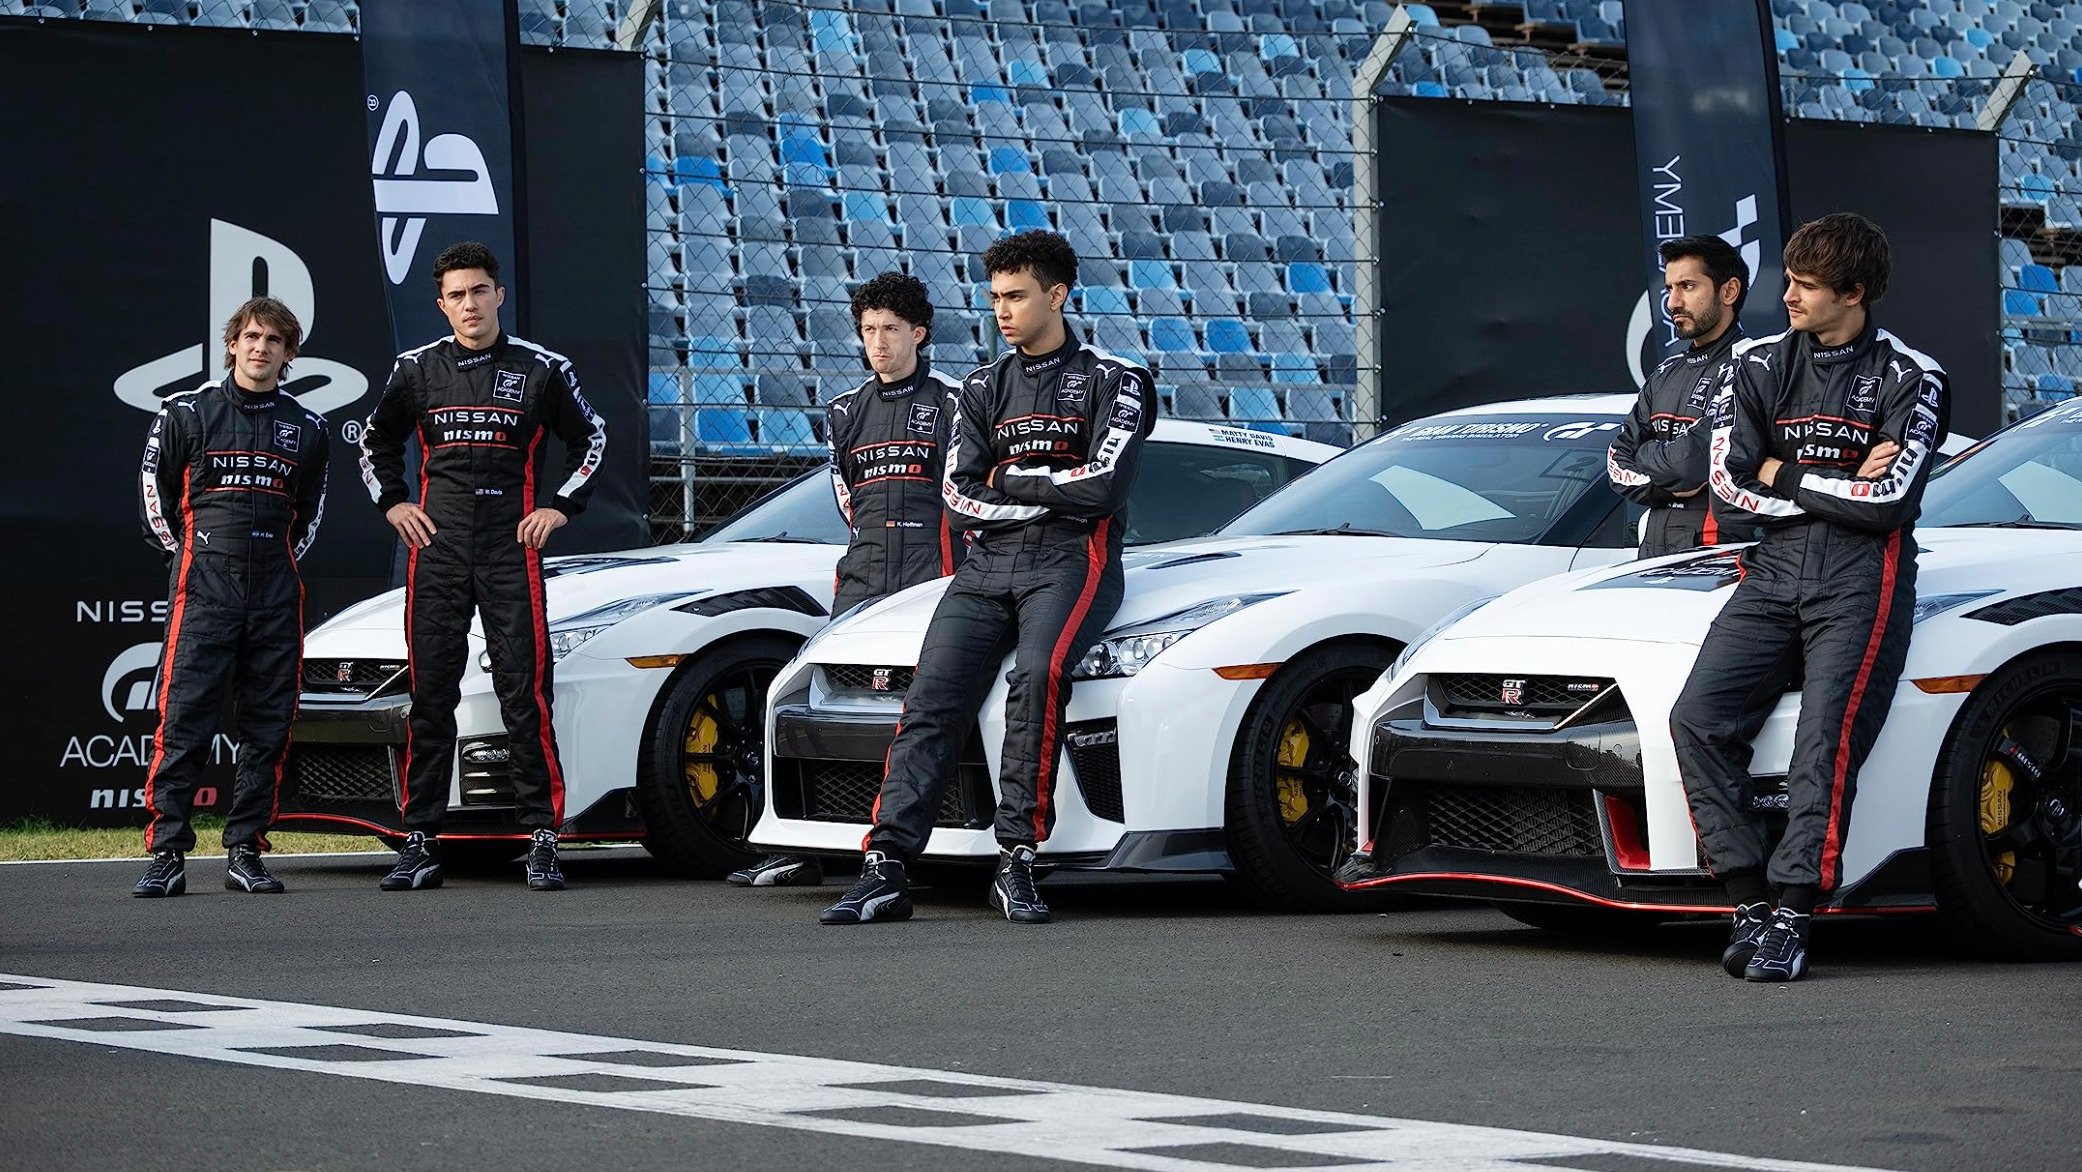 Gran Turismo Movie Doesn't Sit Well With Multiple Critics Ahead of Release